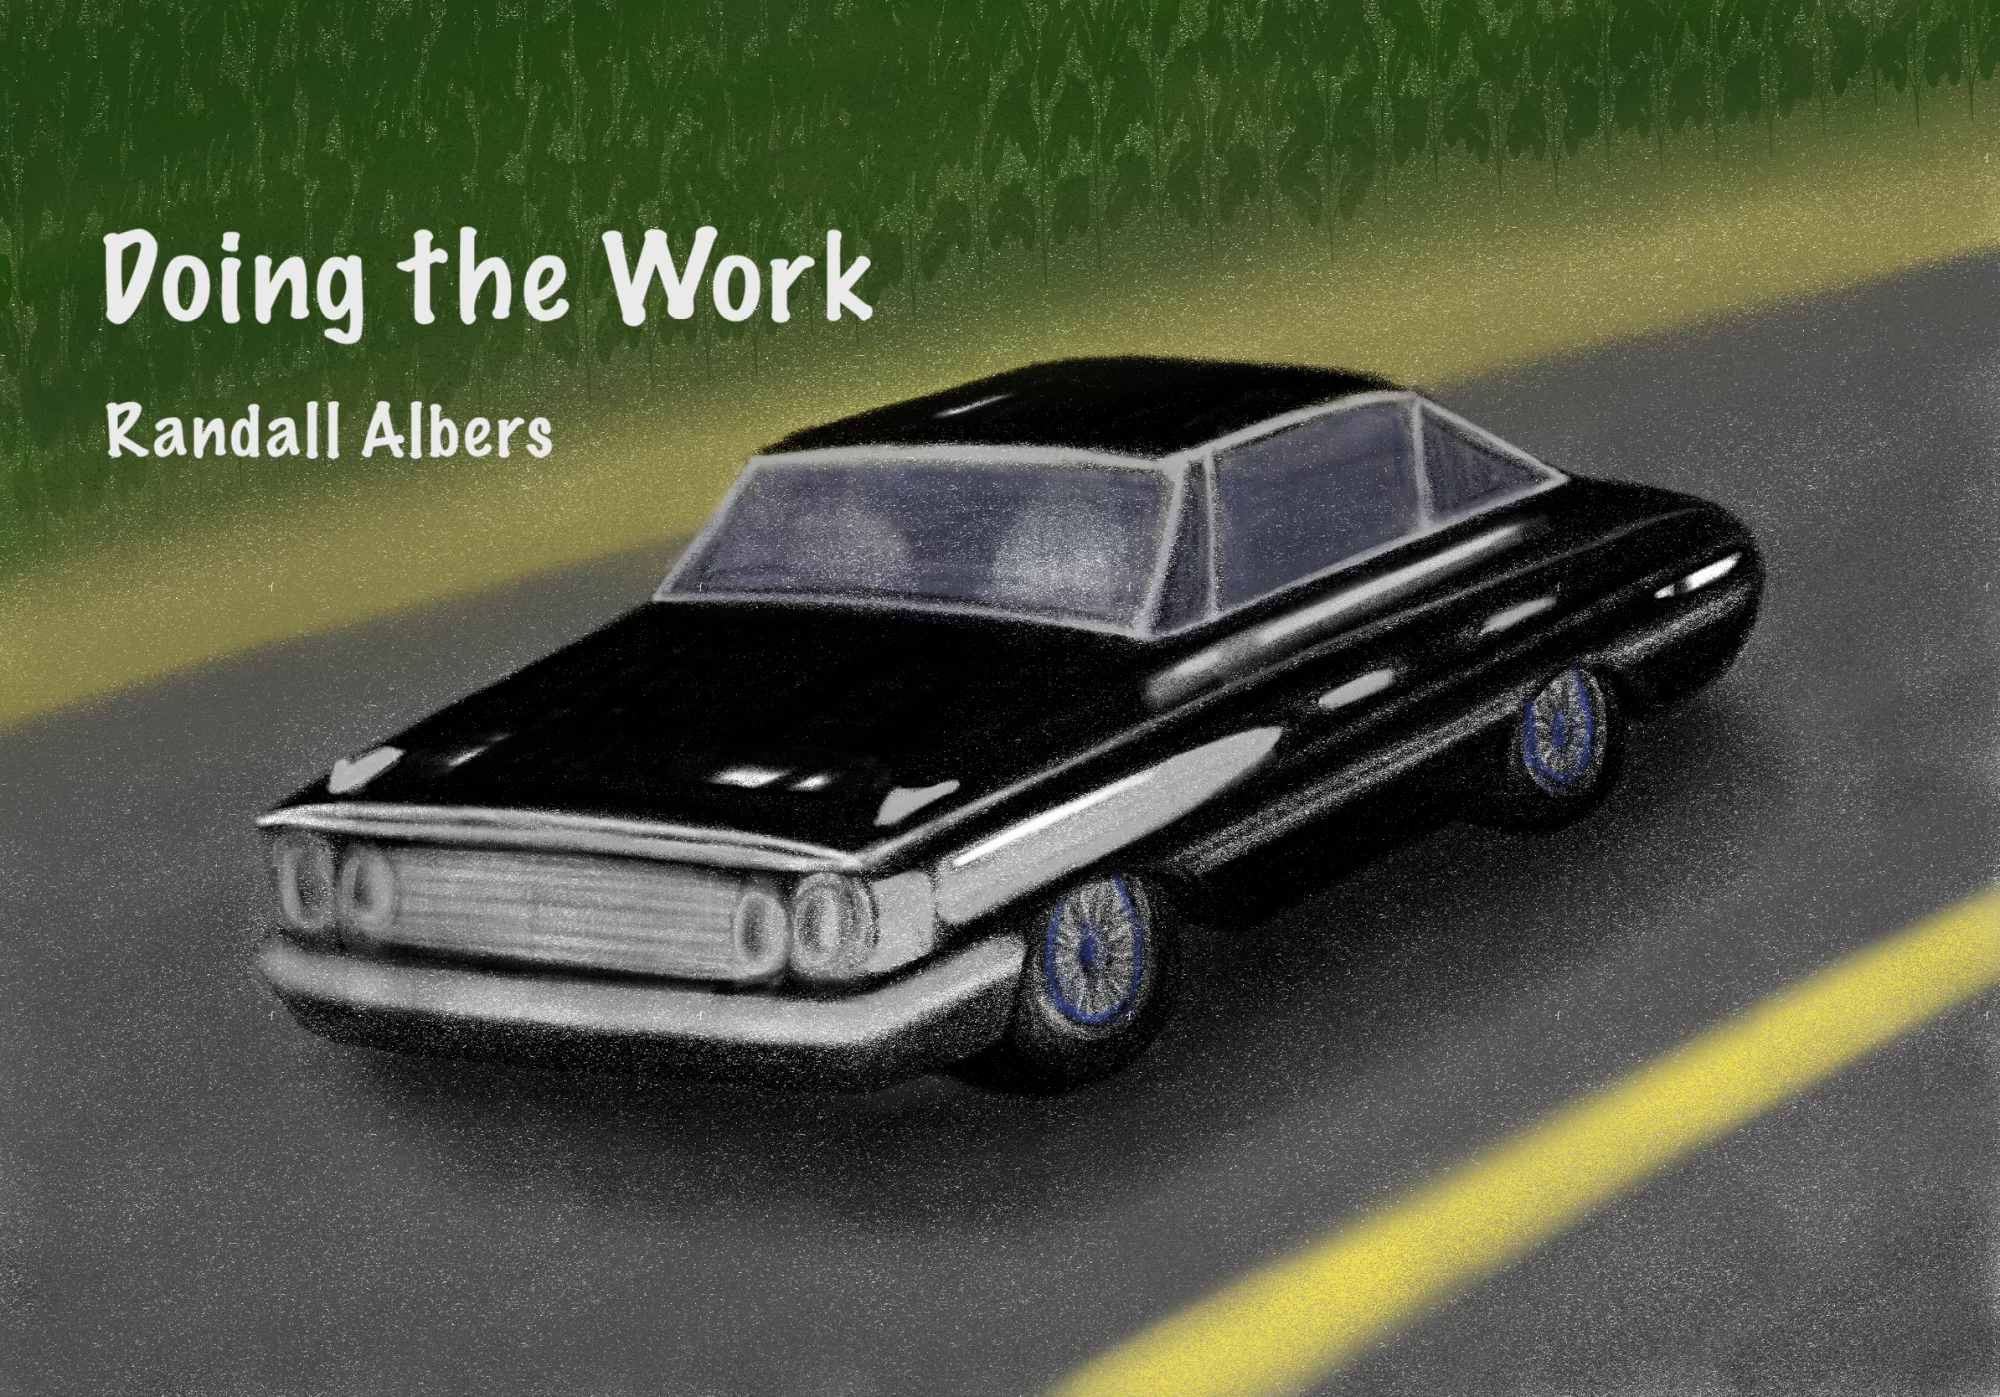 Doing the Work by Randall Albers